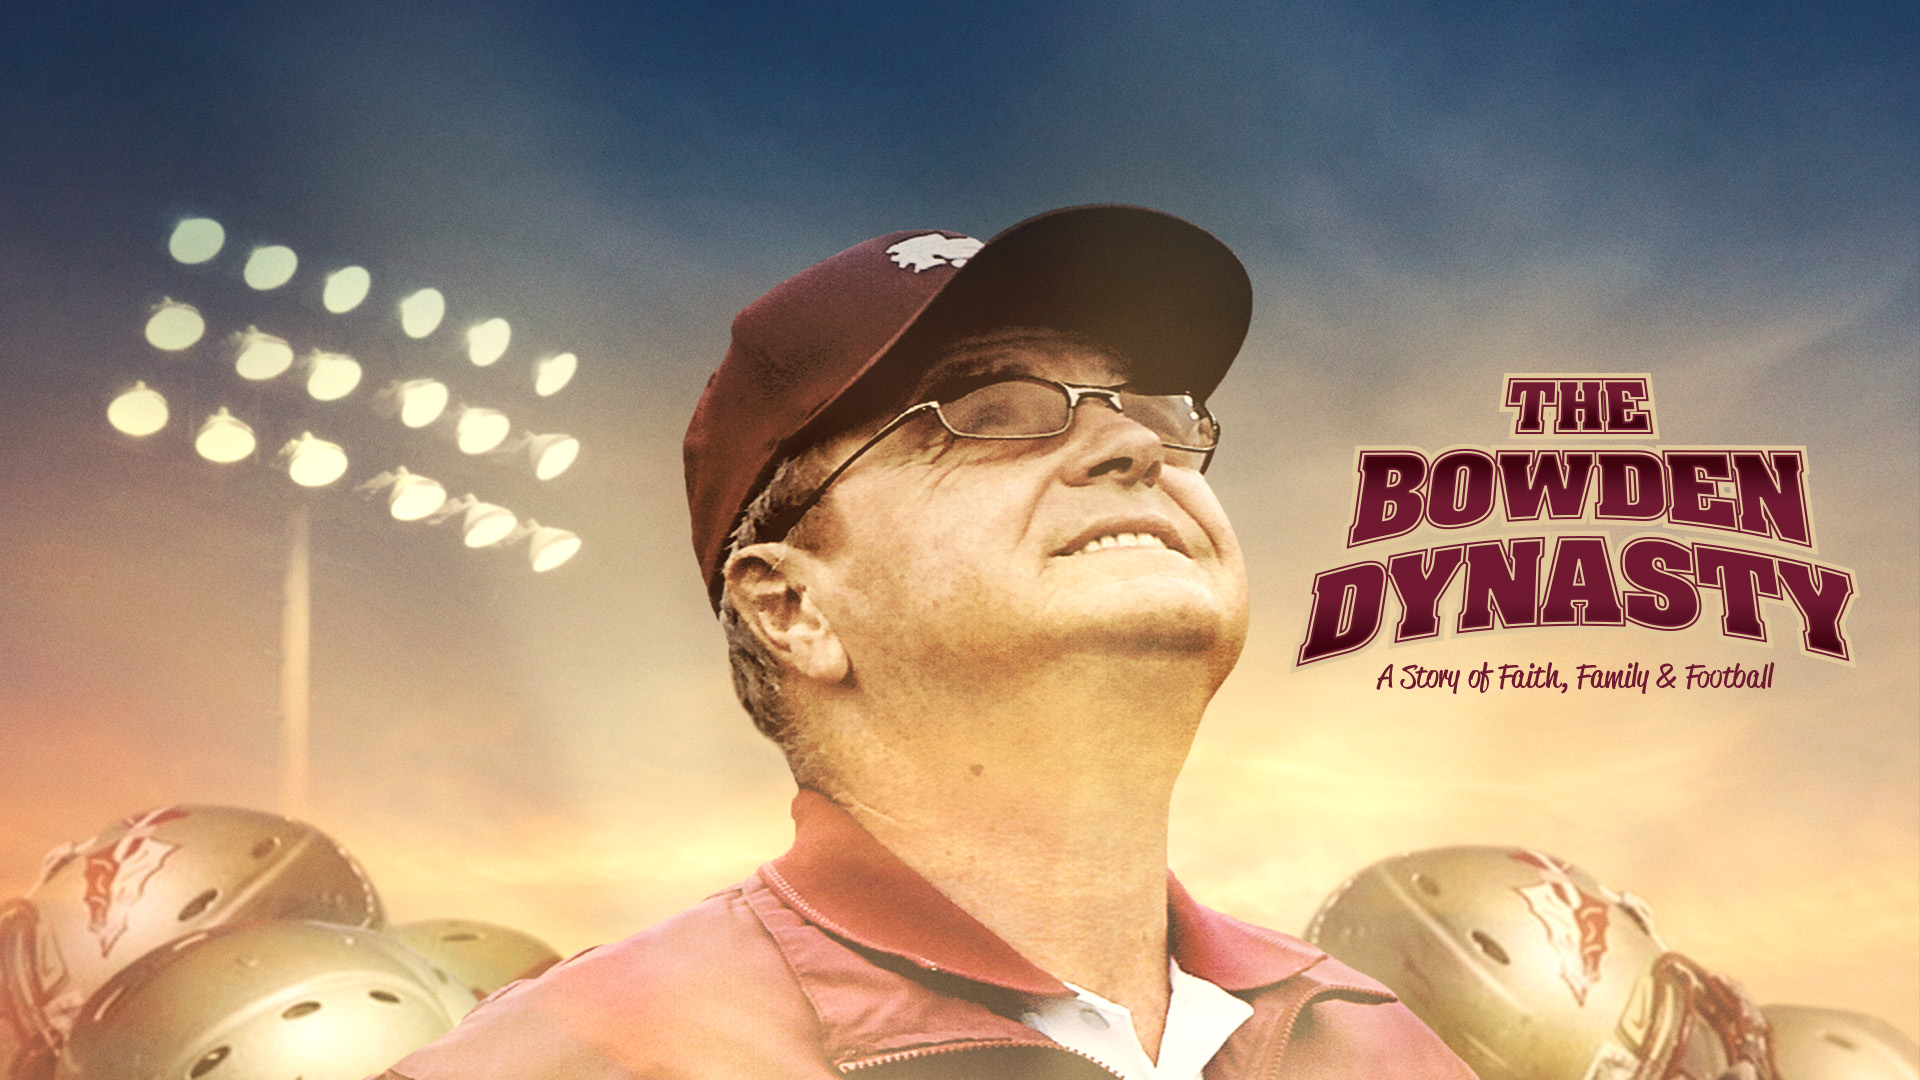 BOBBY BOWDEN FILM COMING TO DIGITAL HD